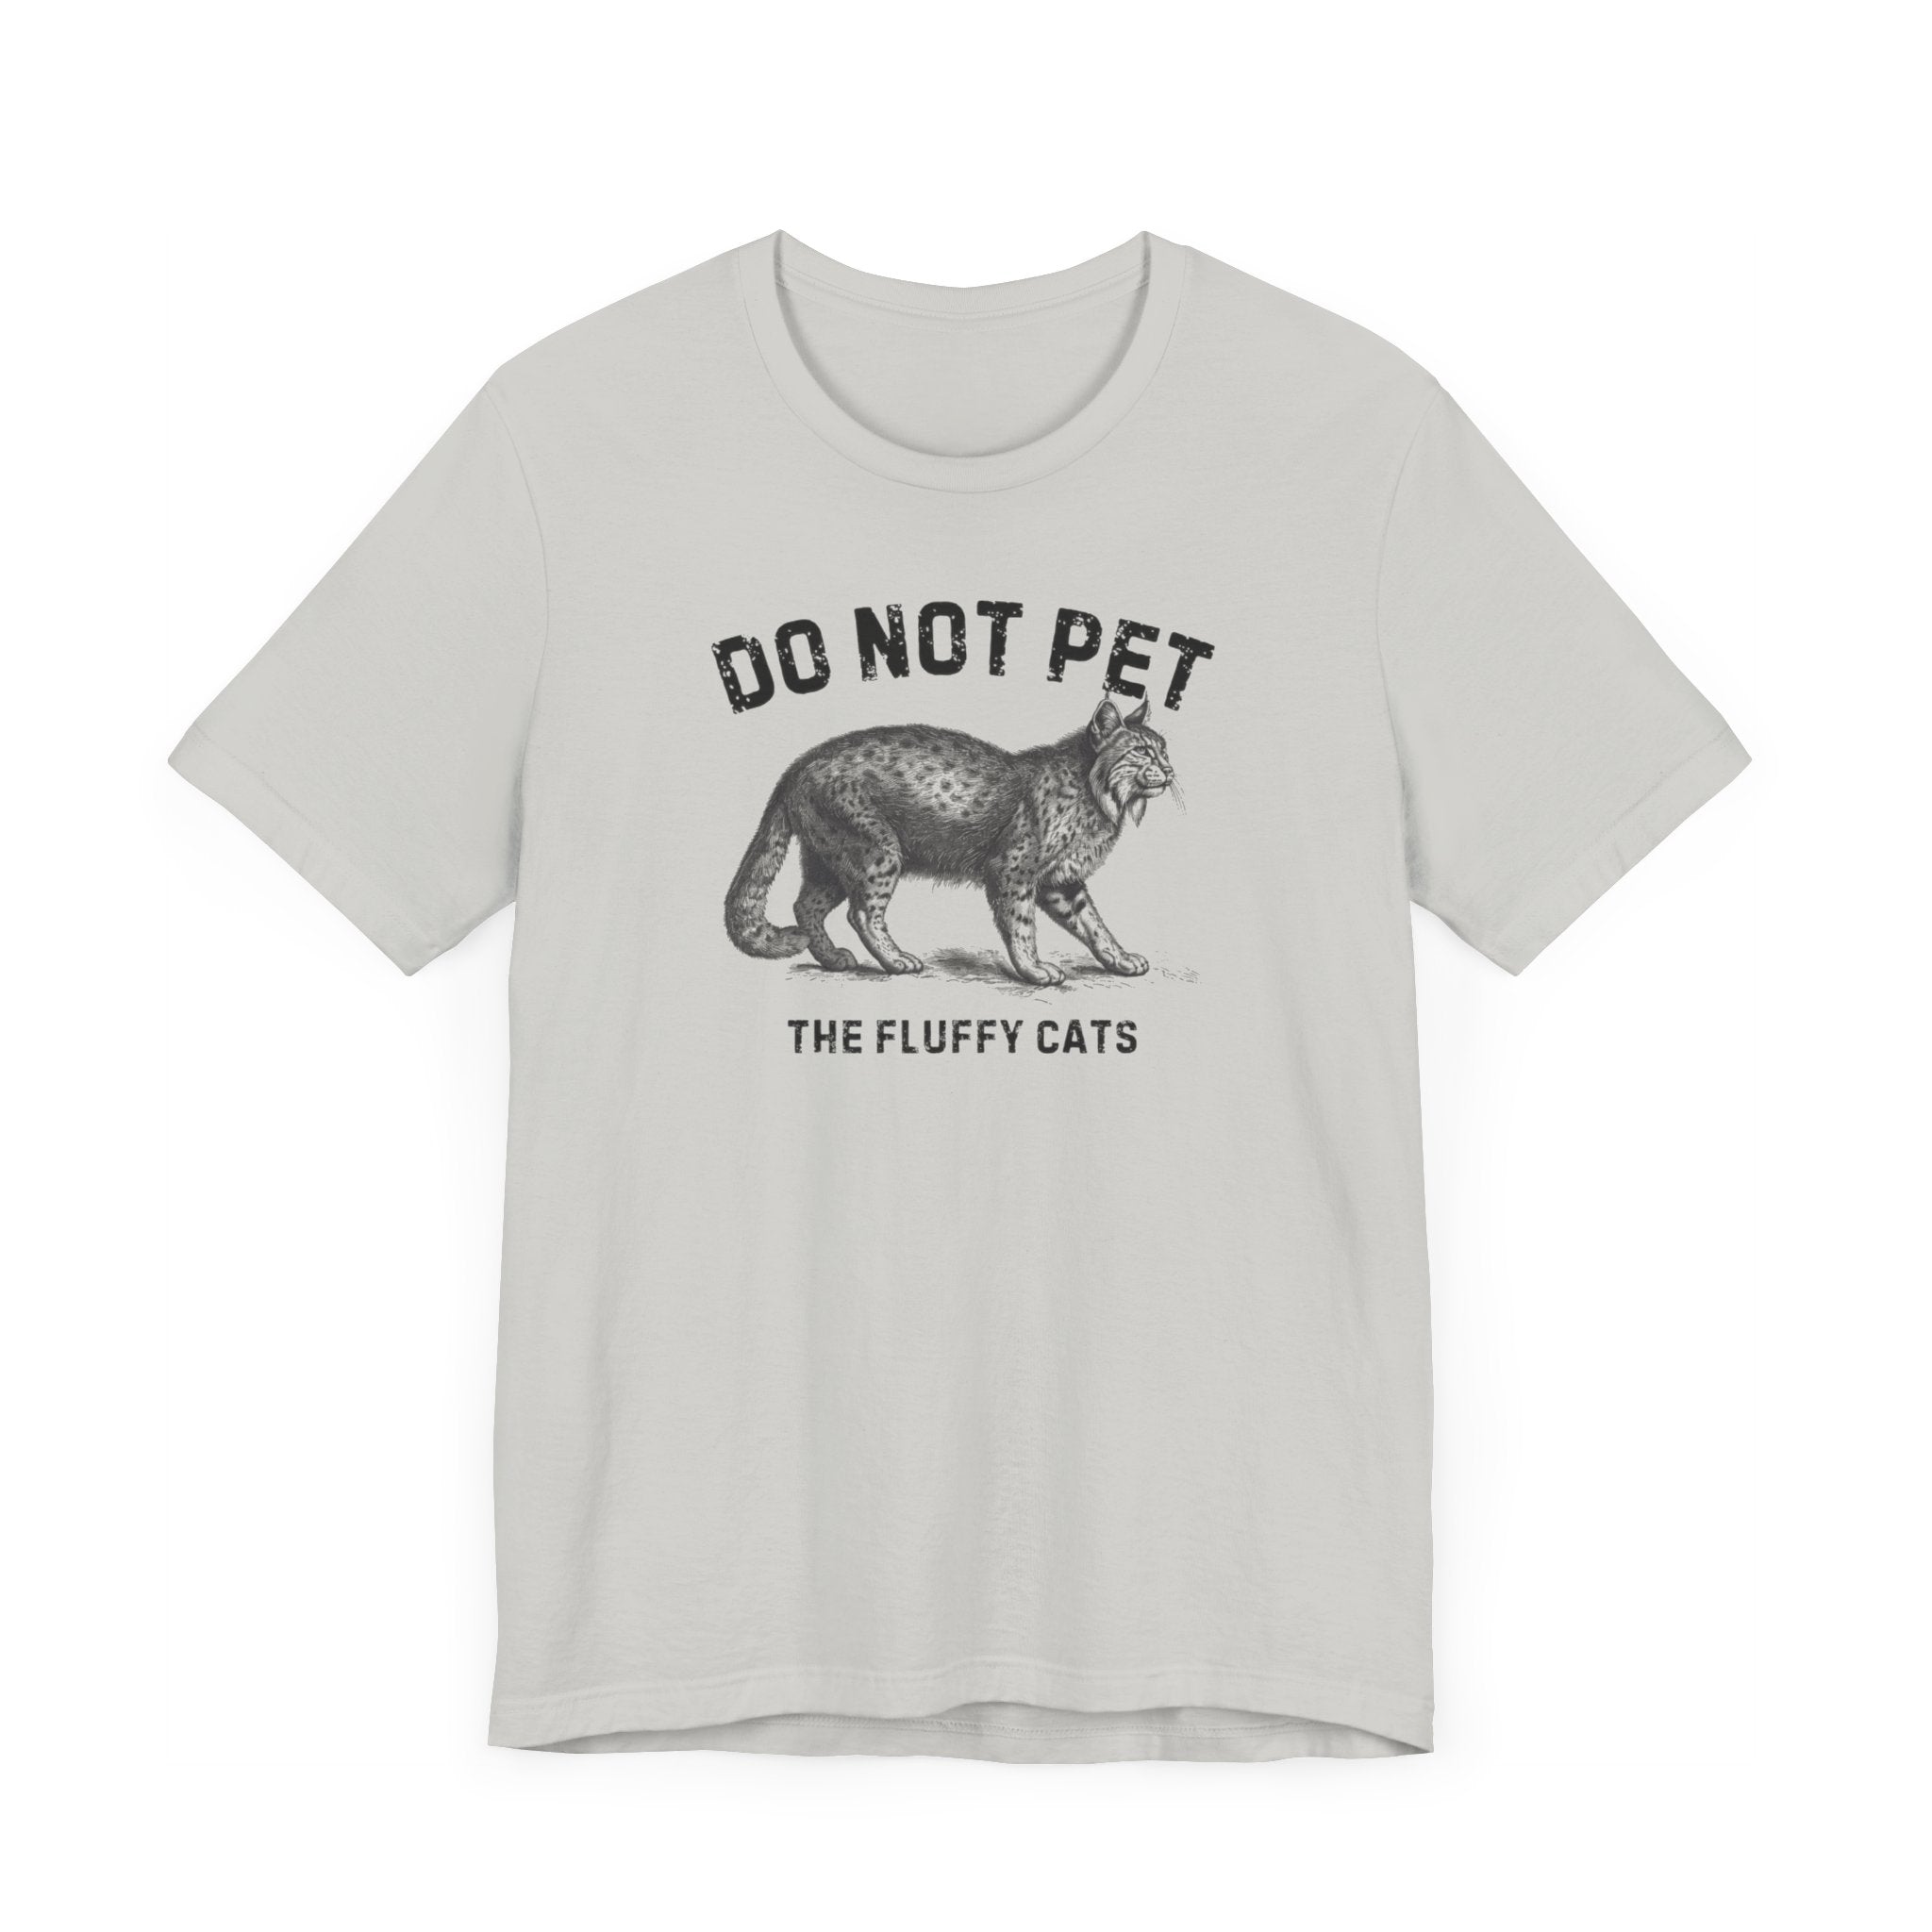 Do Not Pet The Fluffy Cats Shirt Funny Animal Lover Tee